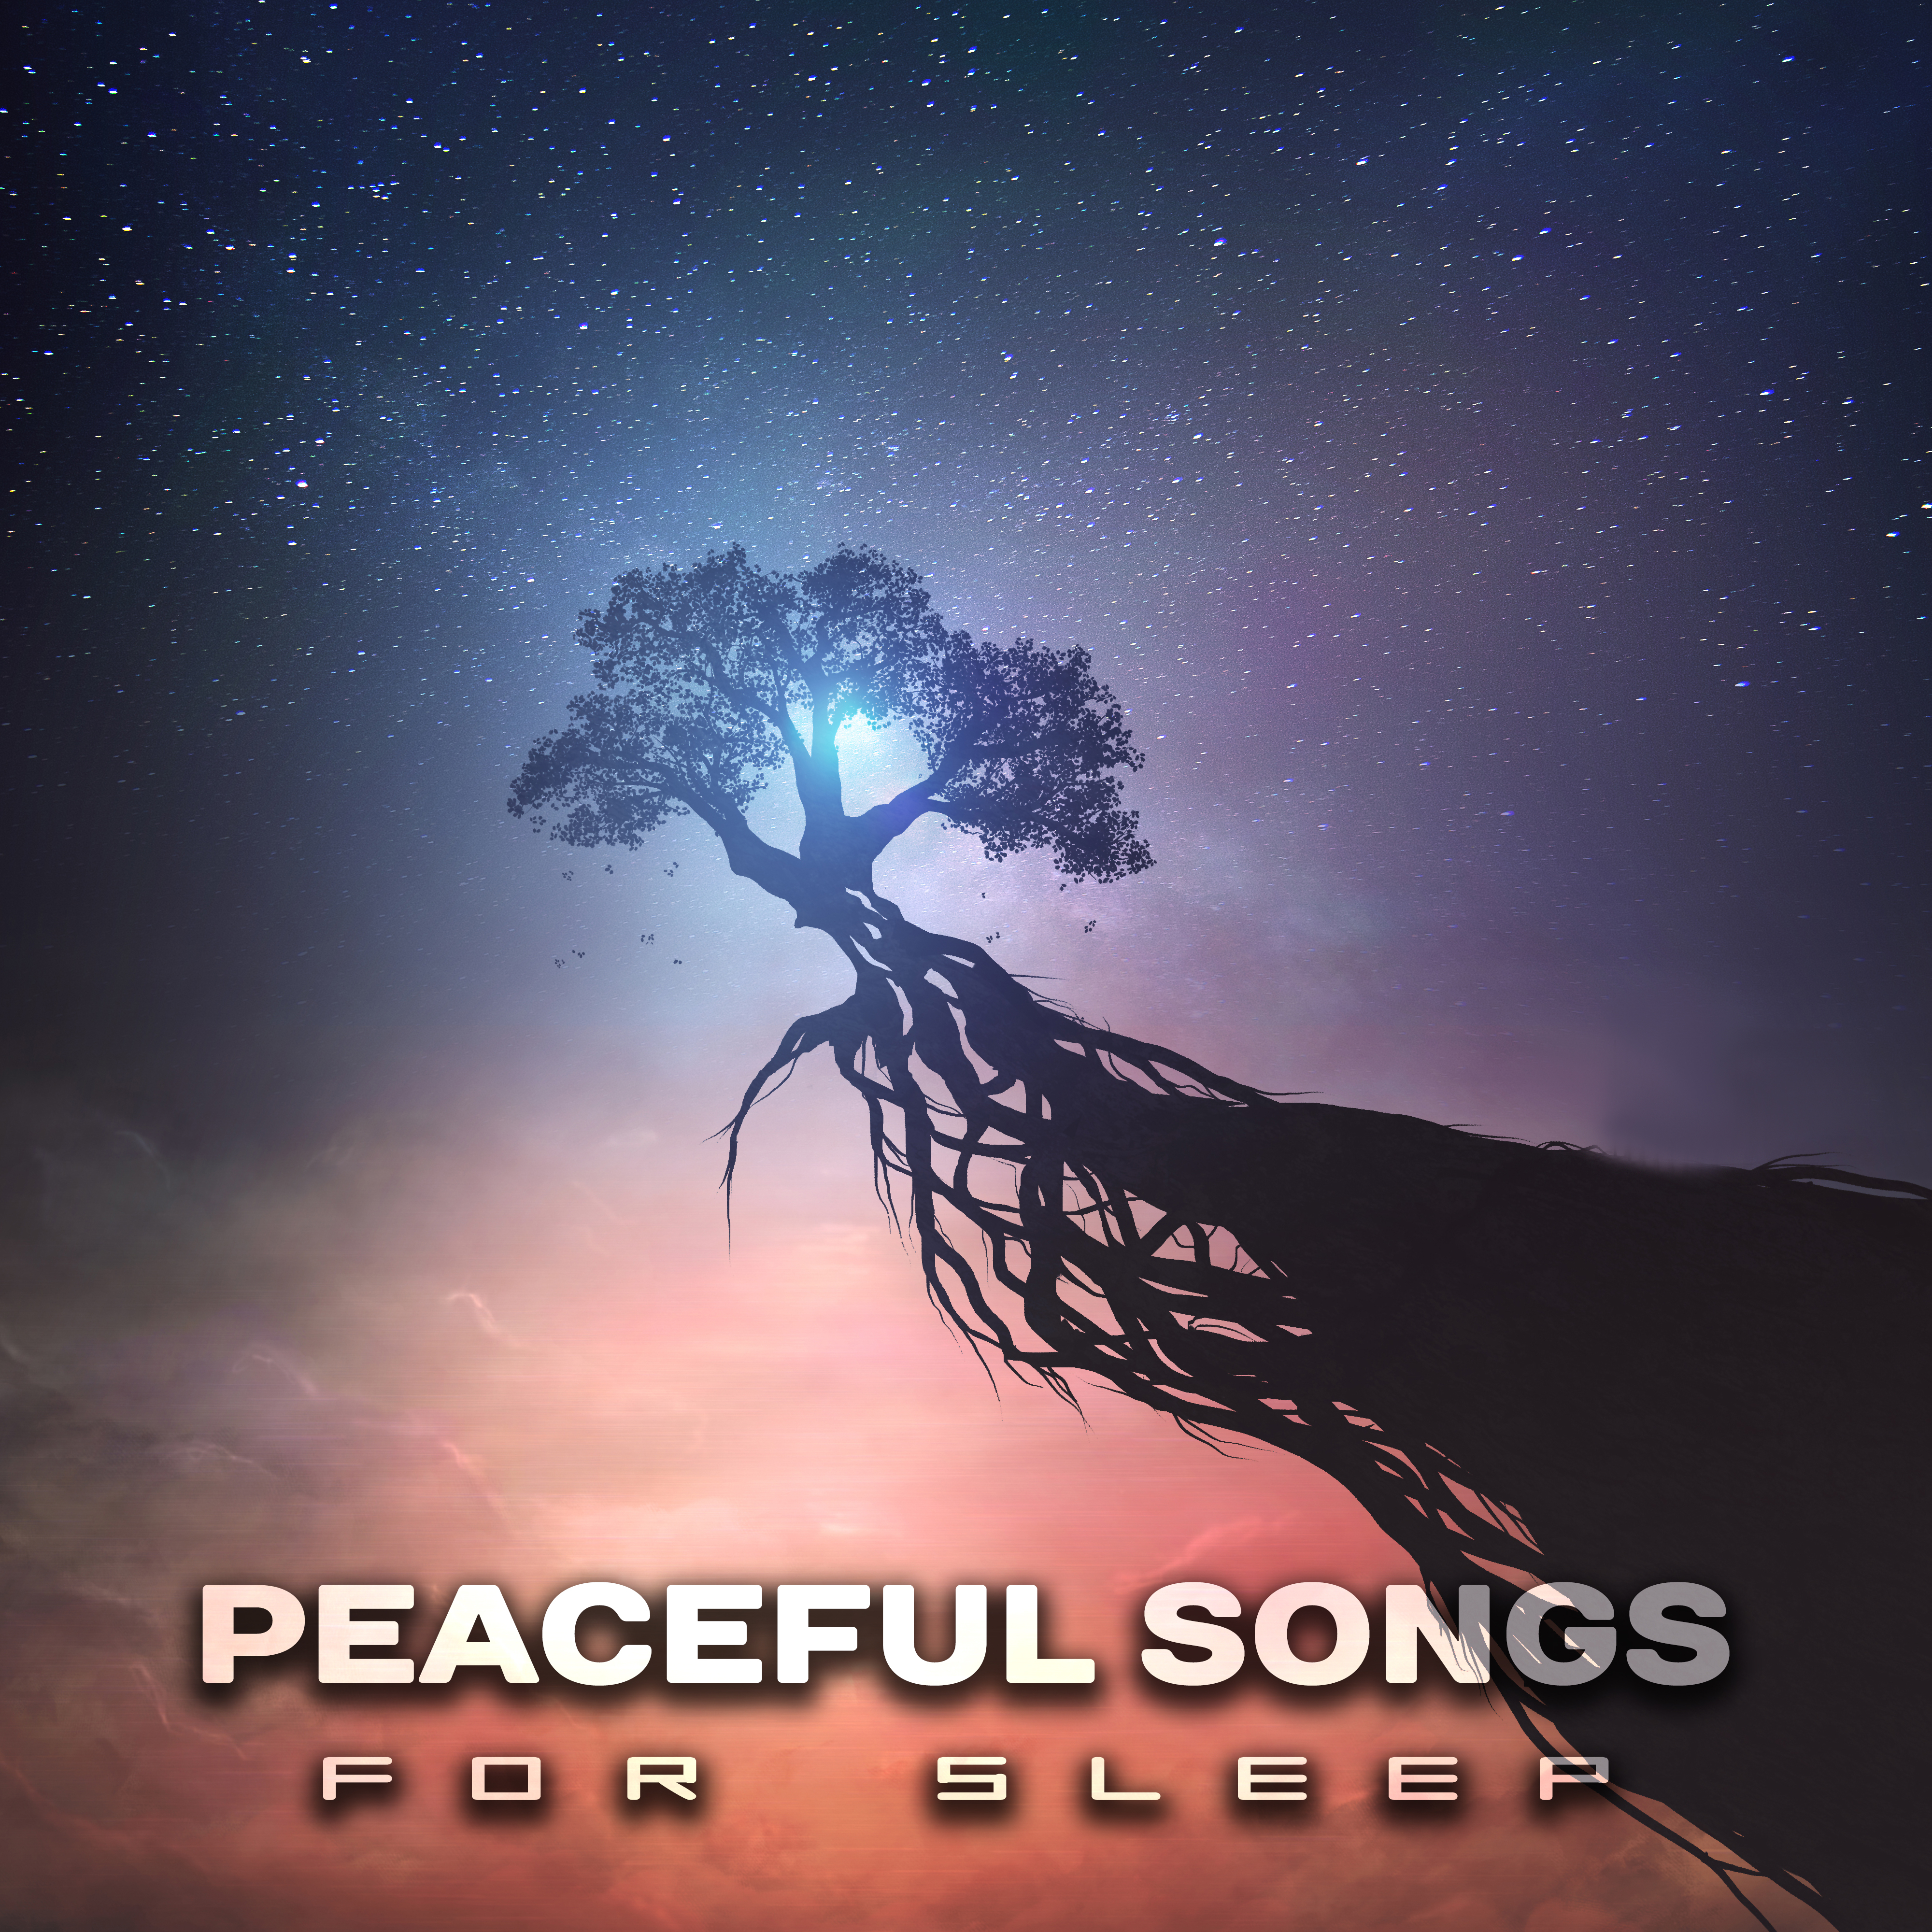 Peaceful Songs for Sleep  Soothing Music to Calm Down, Restful Sleep, Relax, Zen Music, Anti Stress Music at Night